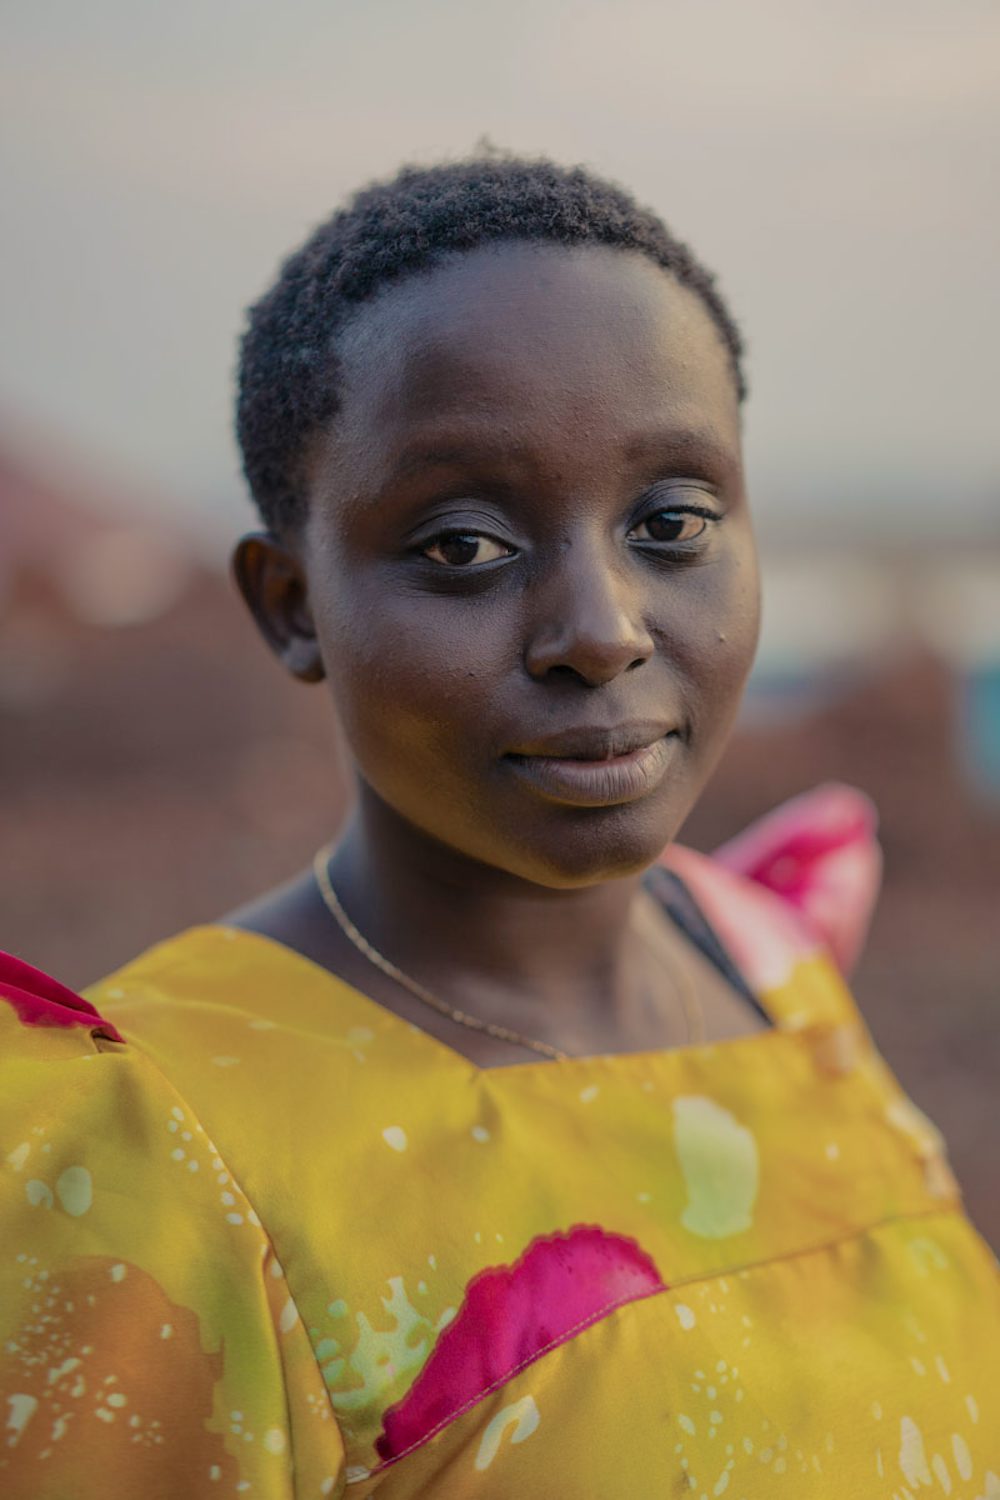 A portrait of a young woman in Uganda.